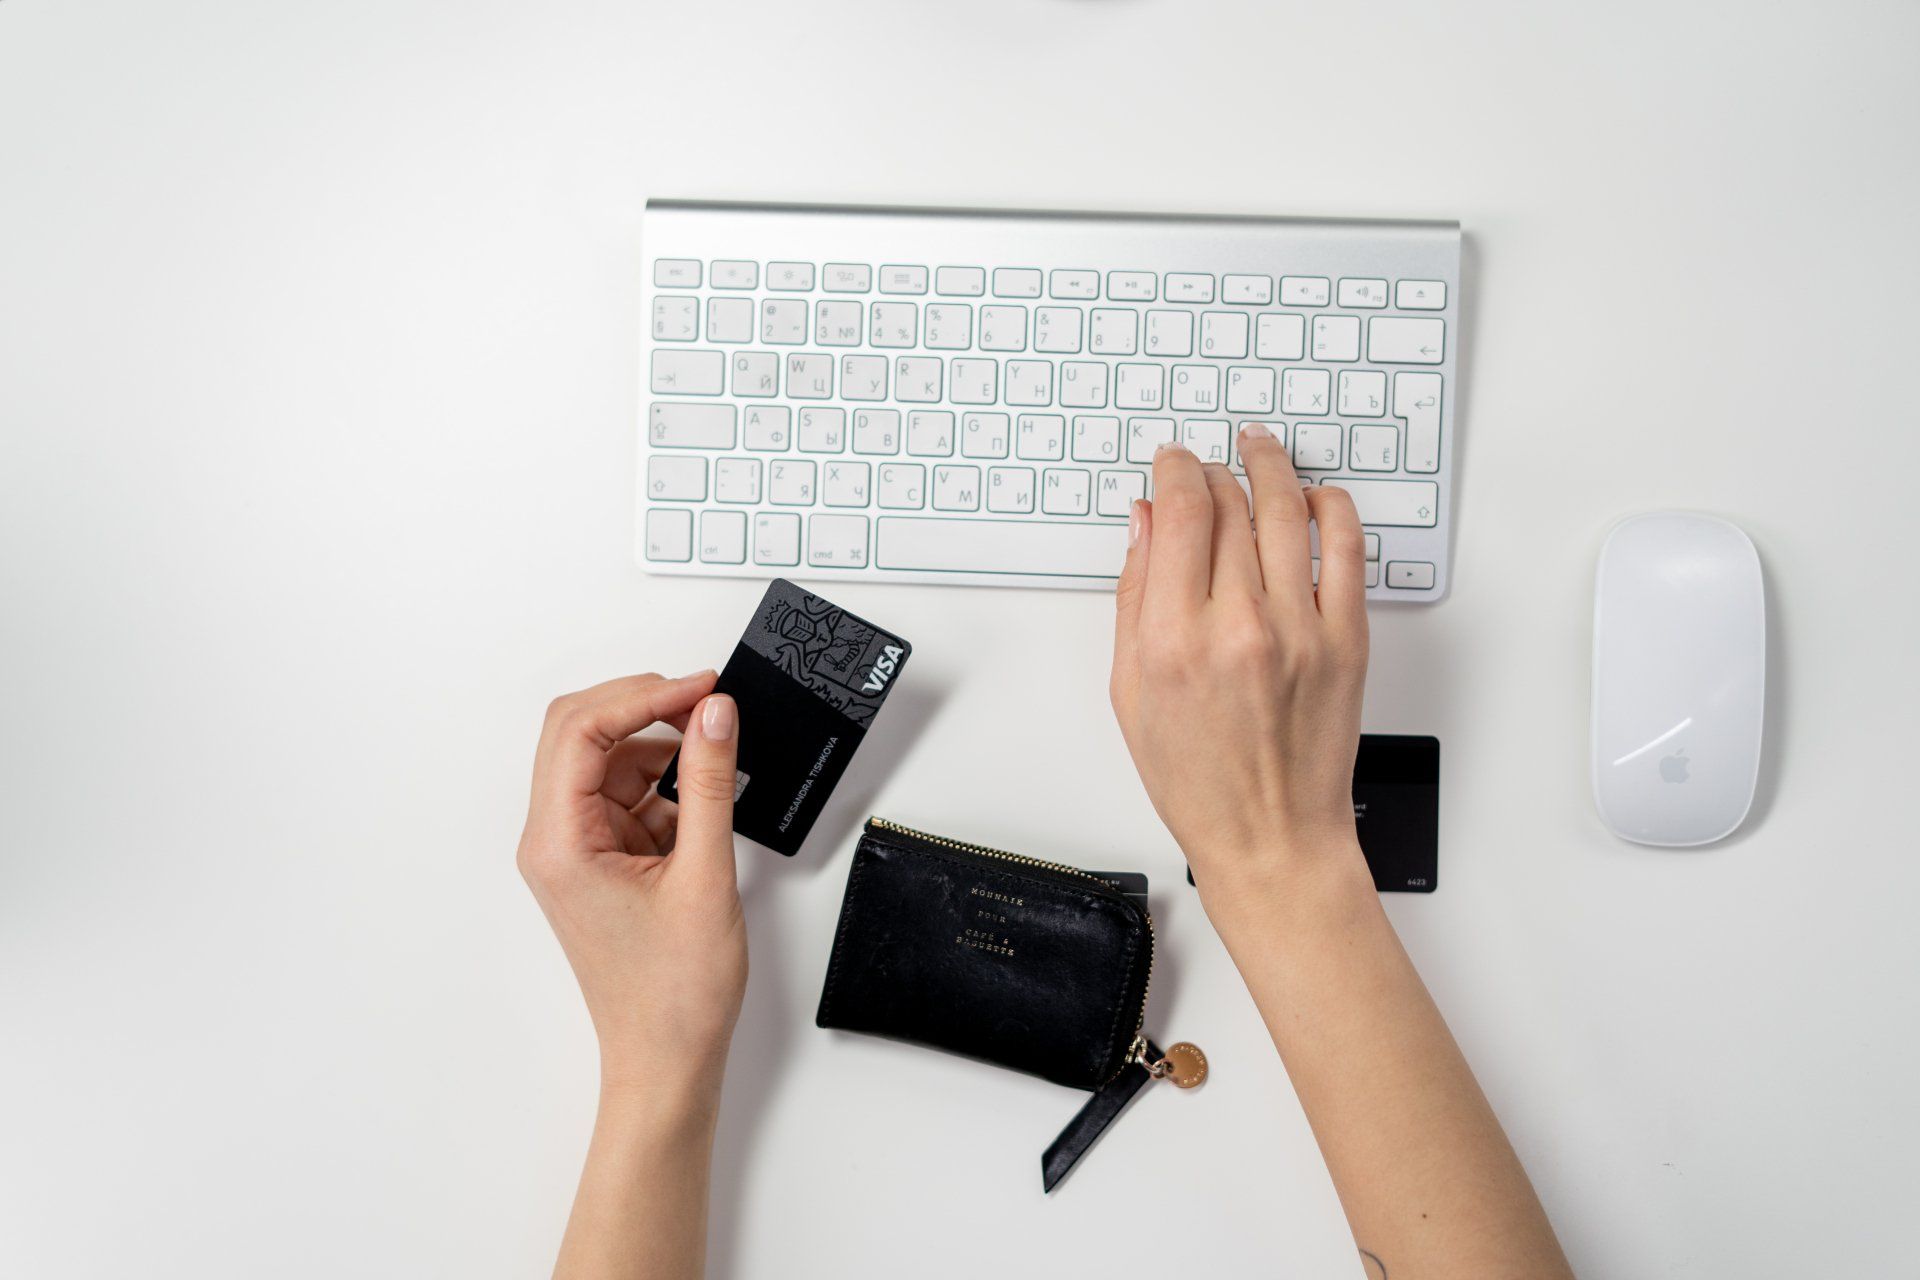 A keyboard, mouse and wallet on a table top while a person holding a credit card online shops.